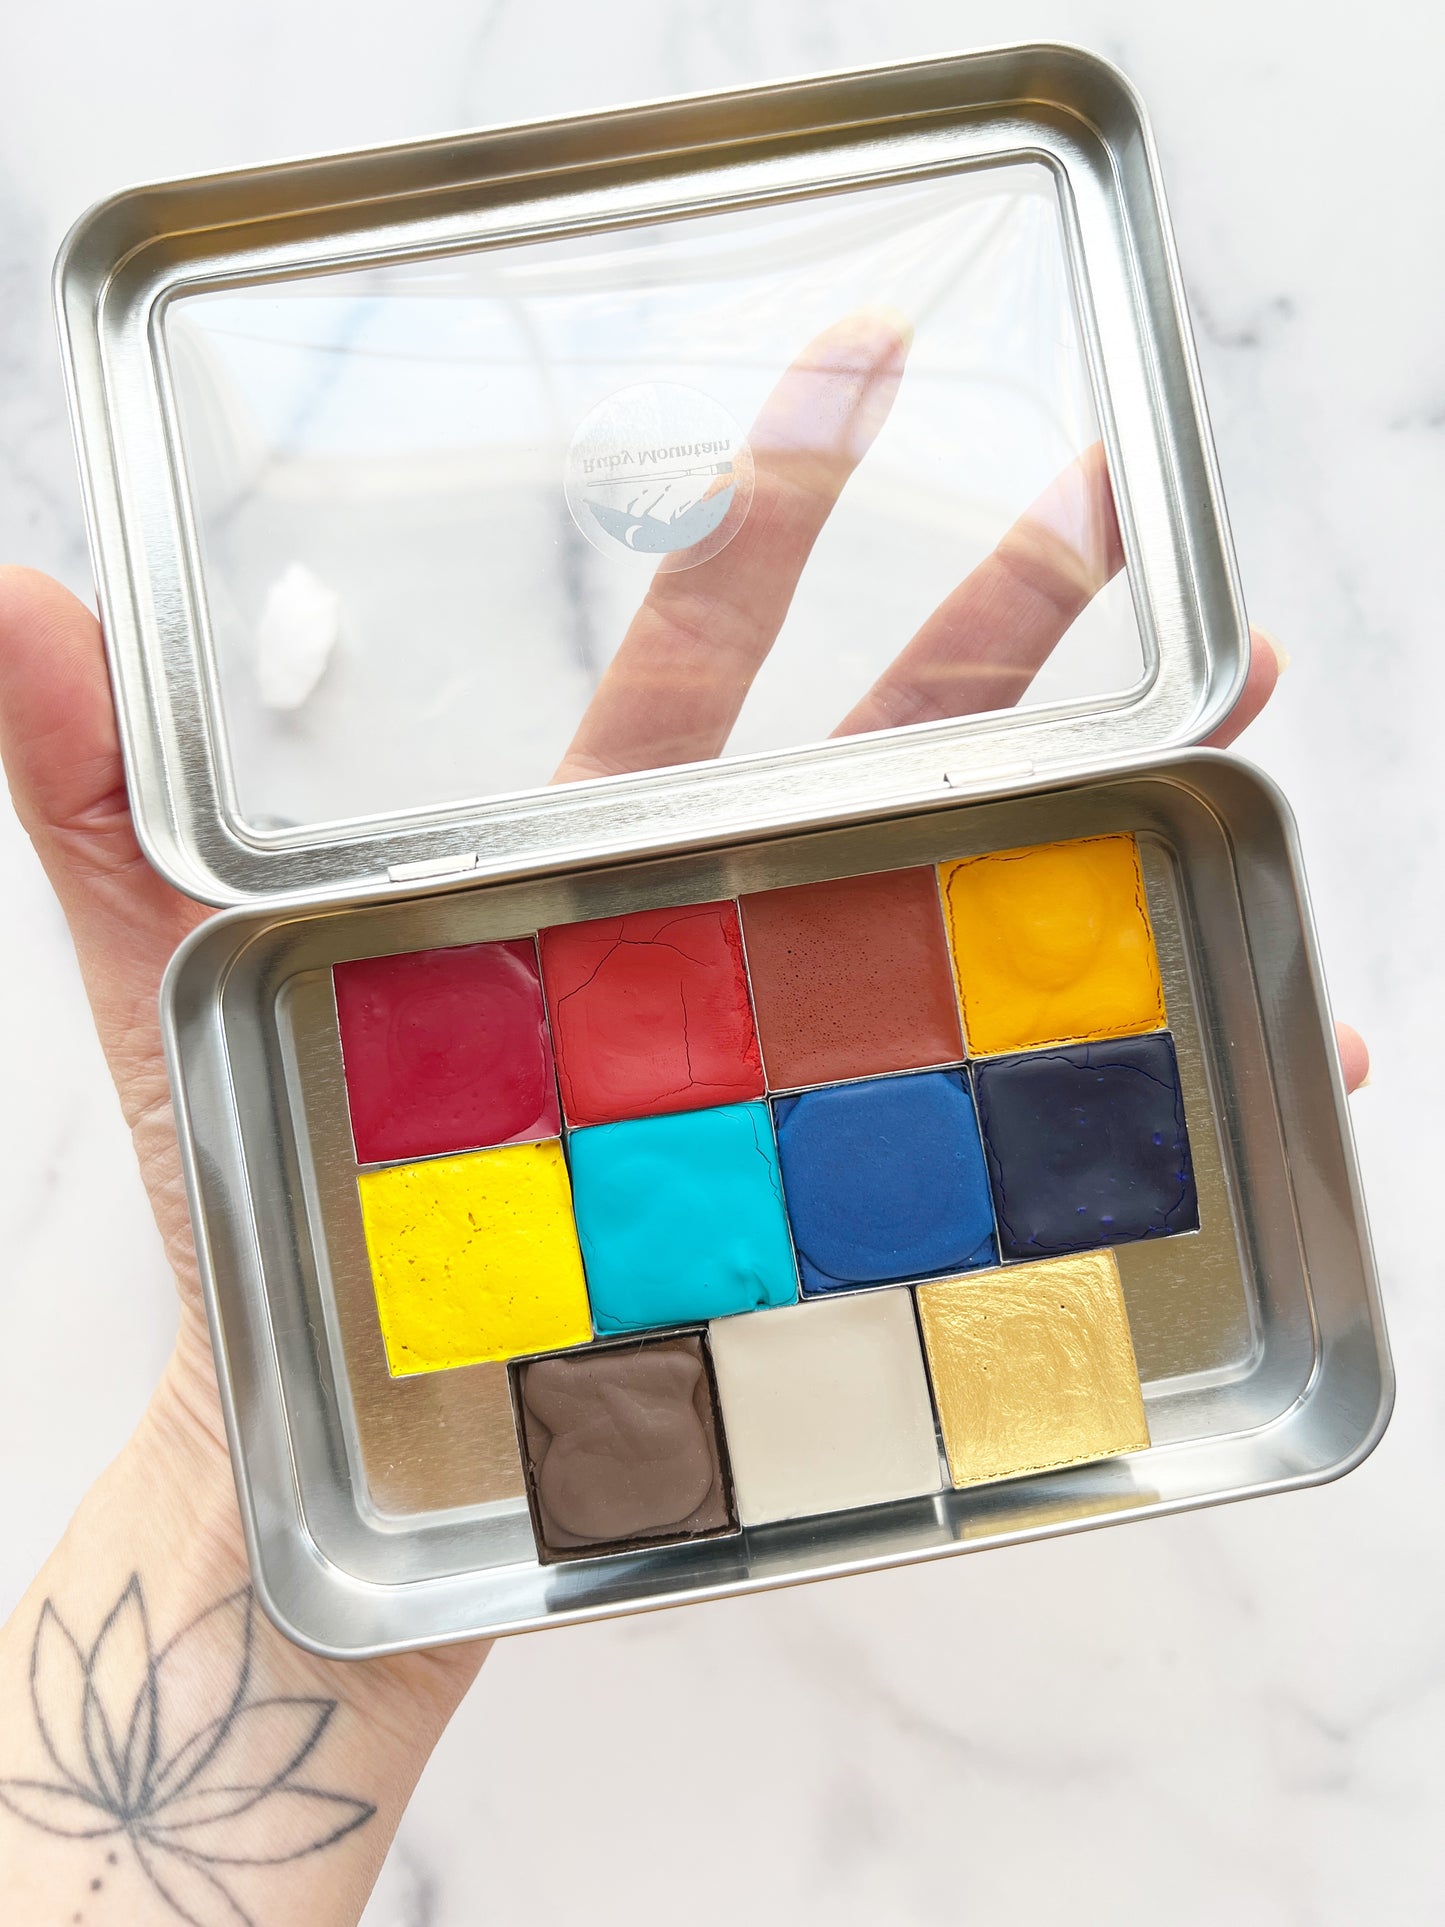 Canyon Primaries Set, a palette of handmade watercolor paint